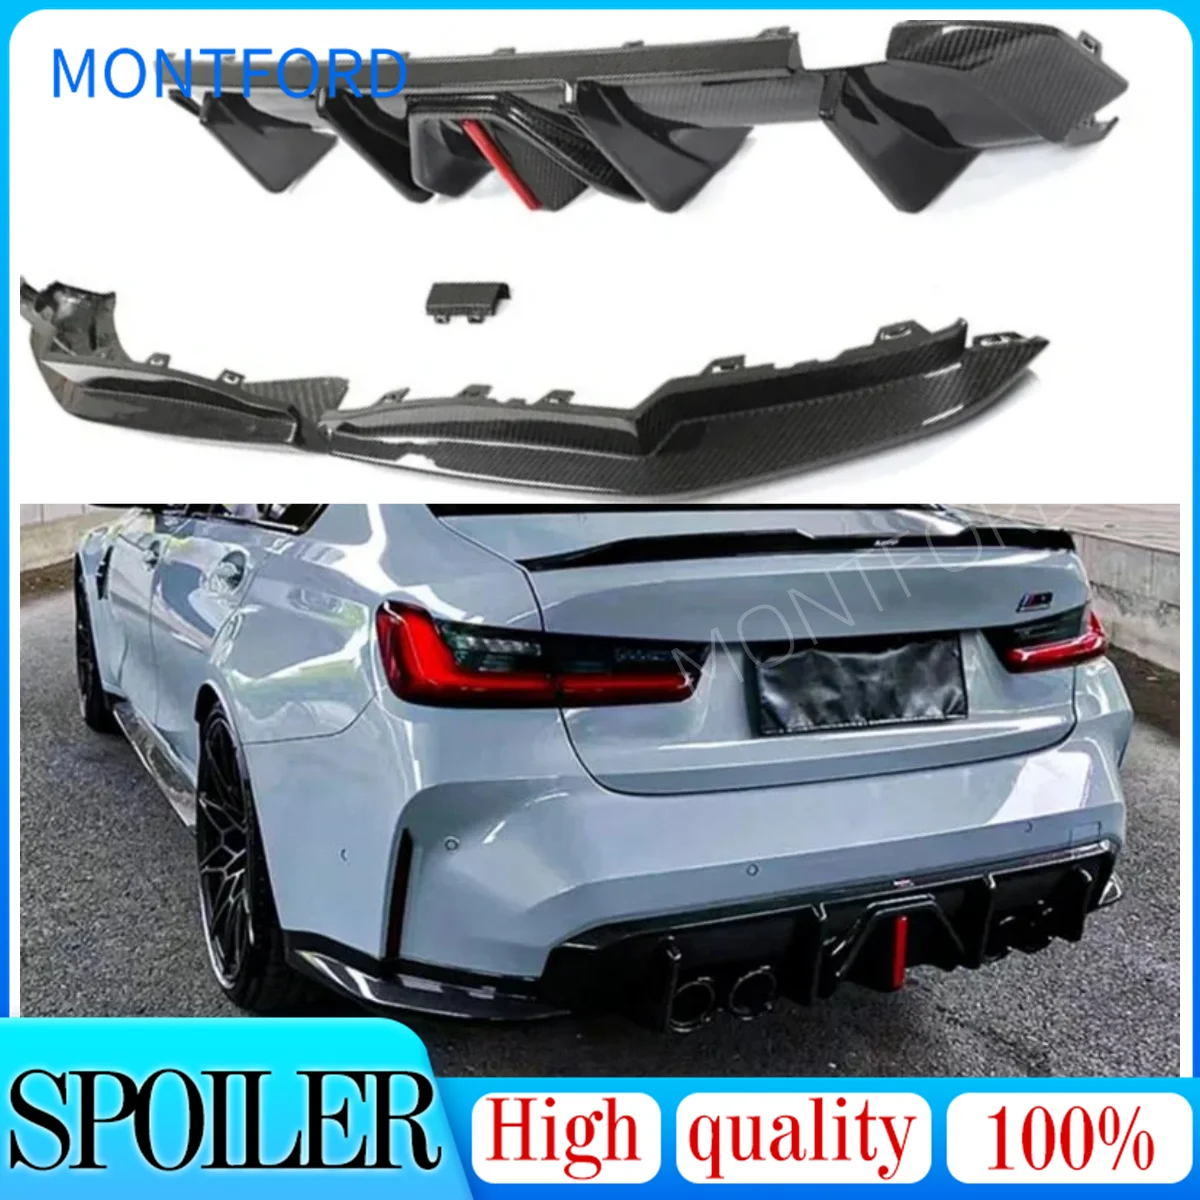 

Dry Carbon Fiber Material Rear Bumper Diffuser Splitter Chin Spoiler Bodykit For BMW G80 G82 M3 M4 Car Tuning Accessories Parts